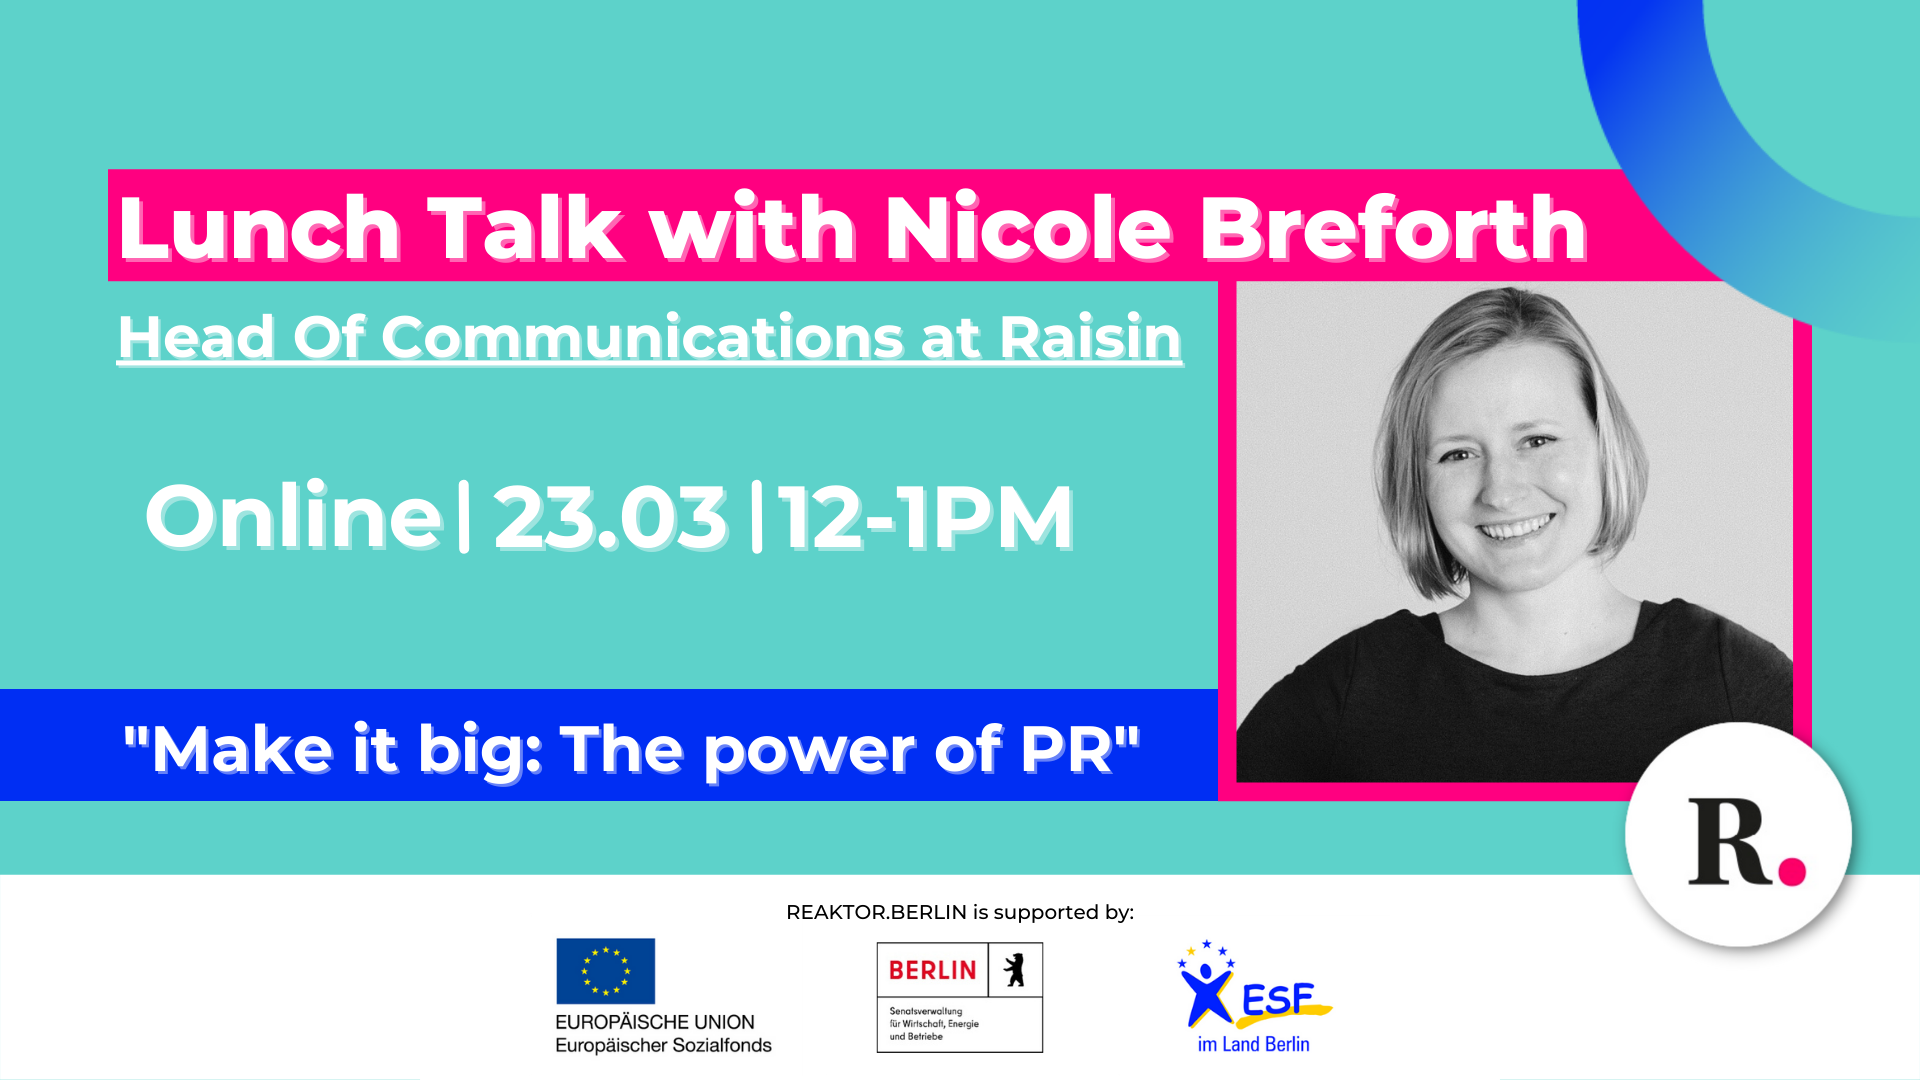 Making it big: The power of PR with Nicole Breforth